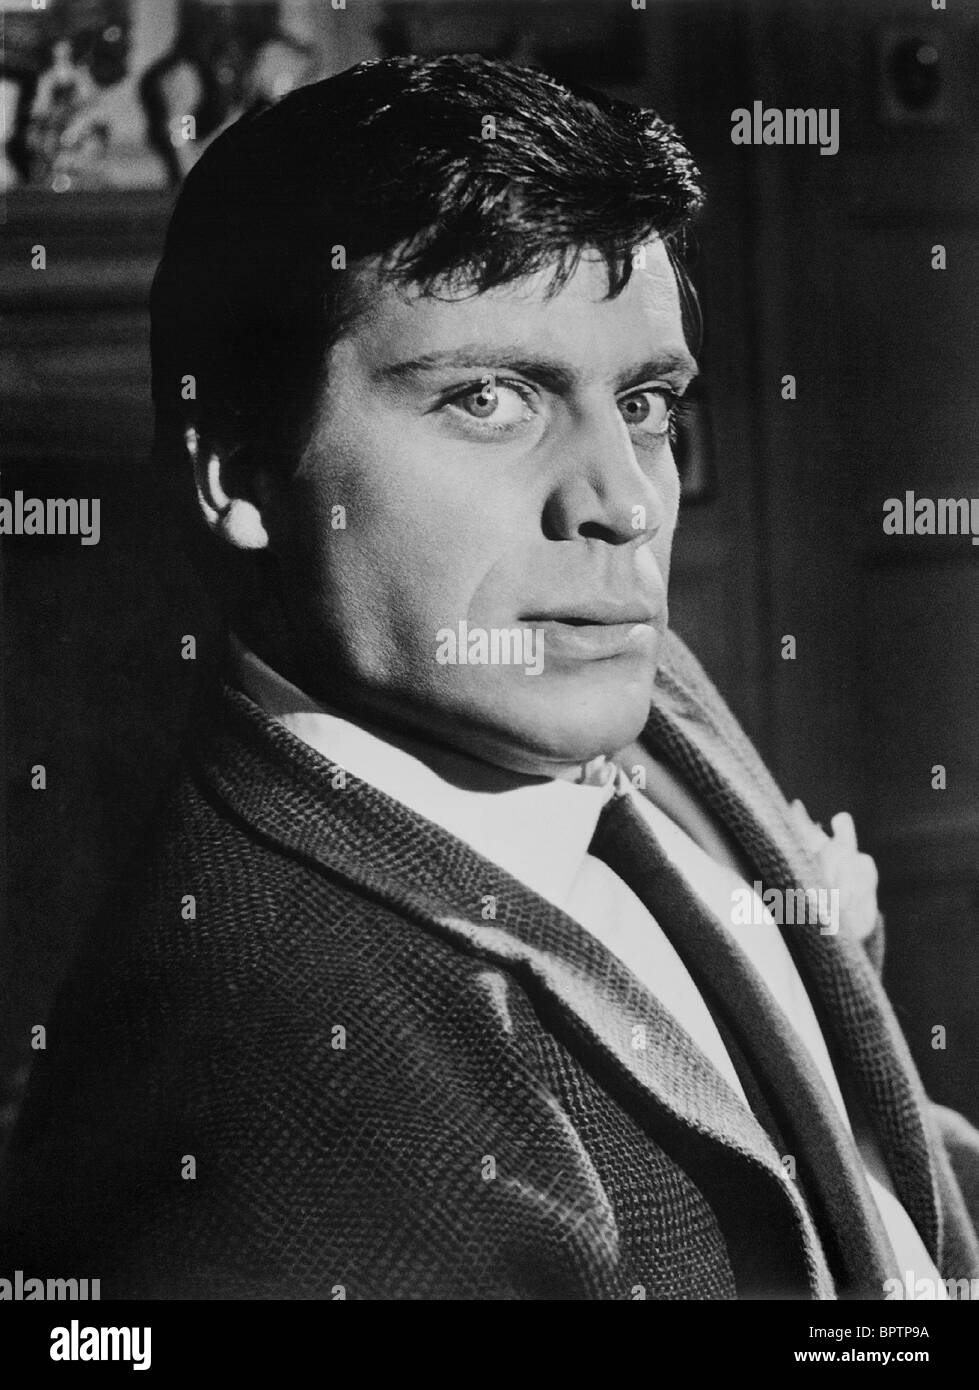 Oliver Reed Handsome Talented Actor Hollywood Hunk Photograph 1960